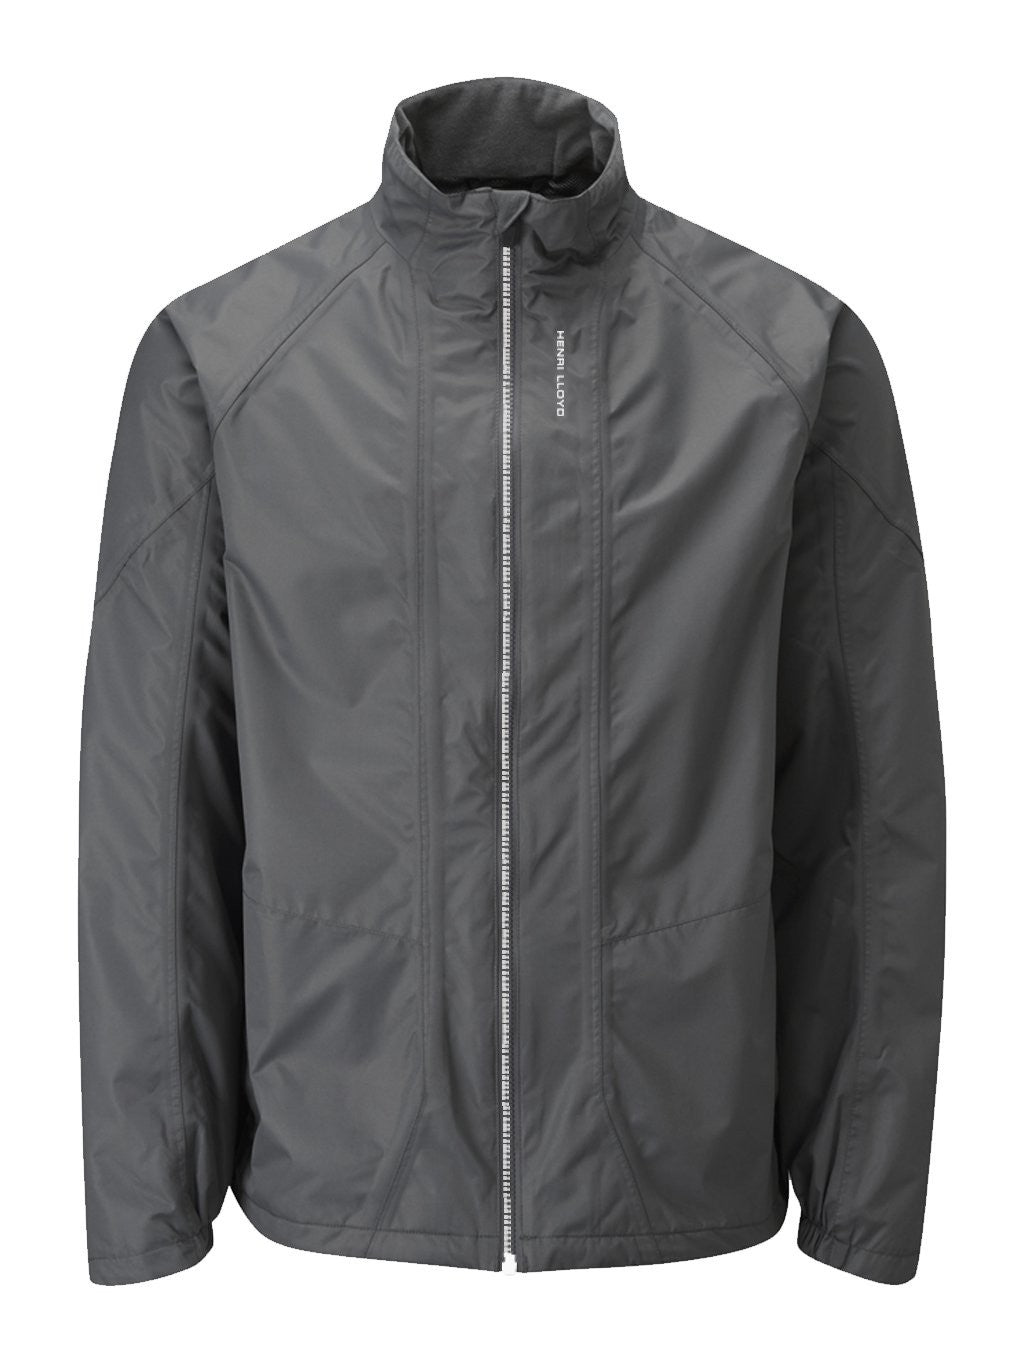 Henri Lloyd Barricade Waterproof Jacket MGT - DISCONTINUED STYLE - SIZE SMALL ONLY